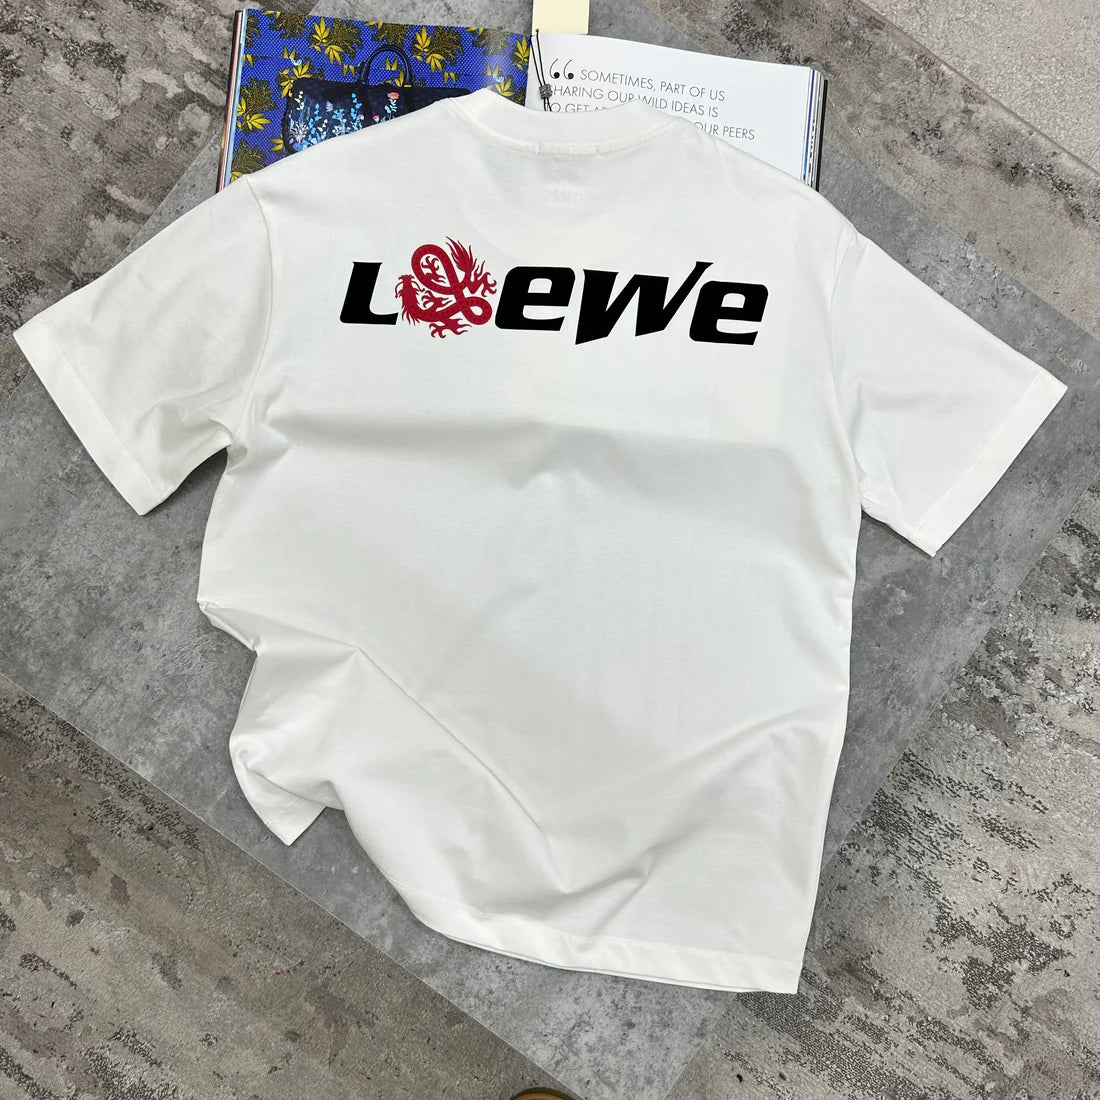 LOEWE Tshirts (click for latest available Tshirts)